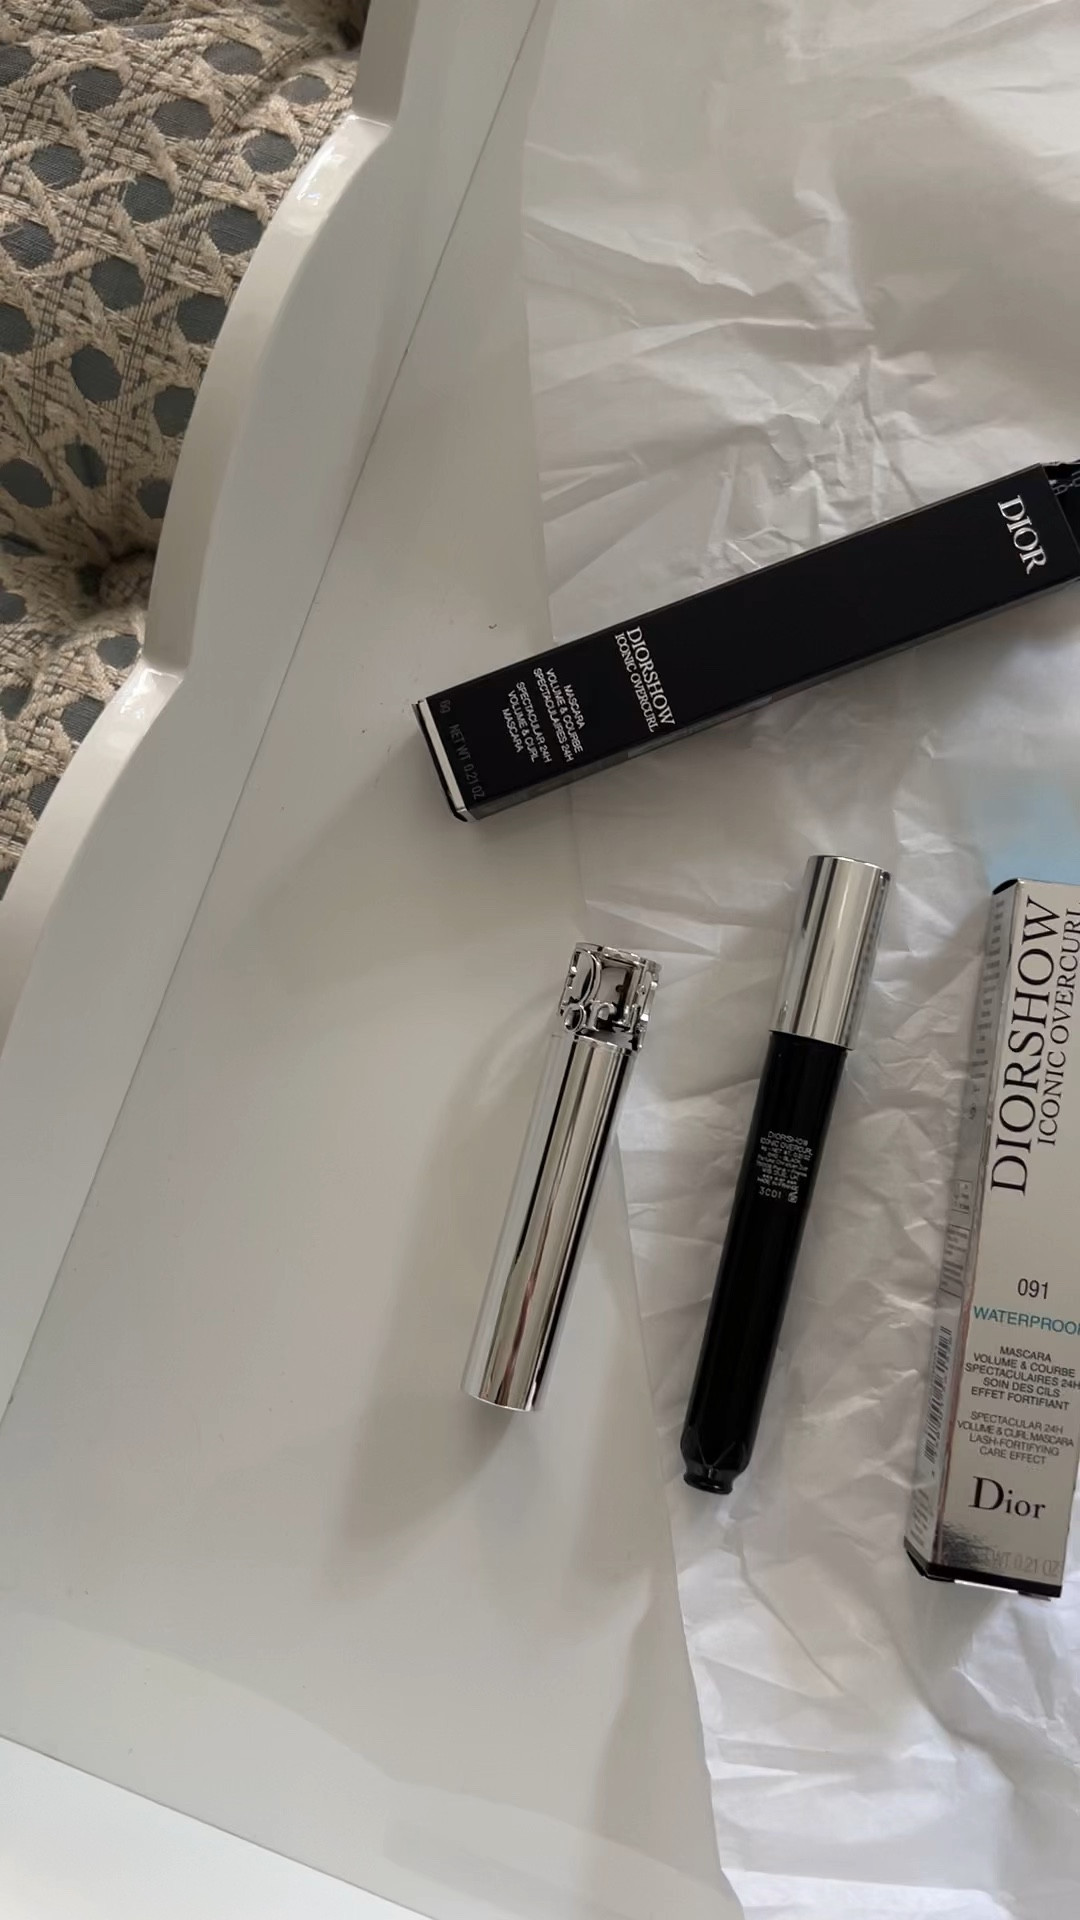 Alternatives comparable to Diorshow Iconic Overcurl Mascara by Dior